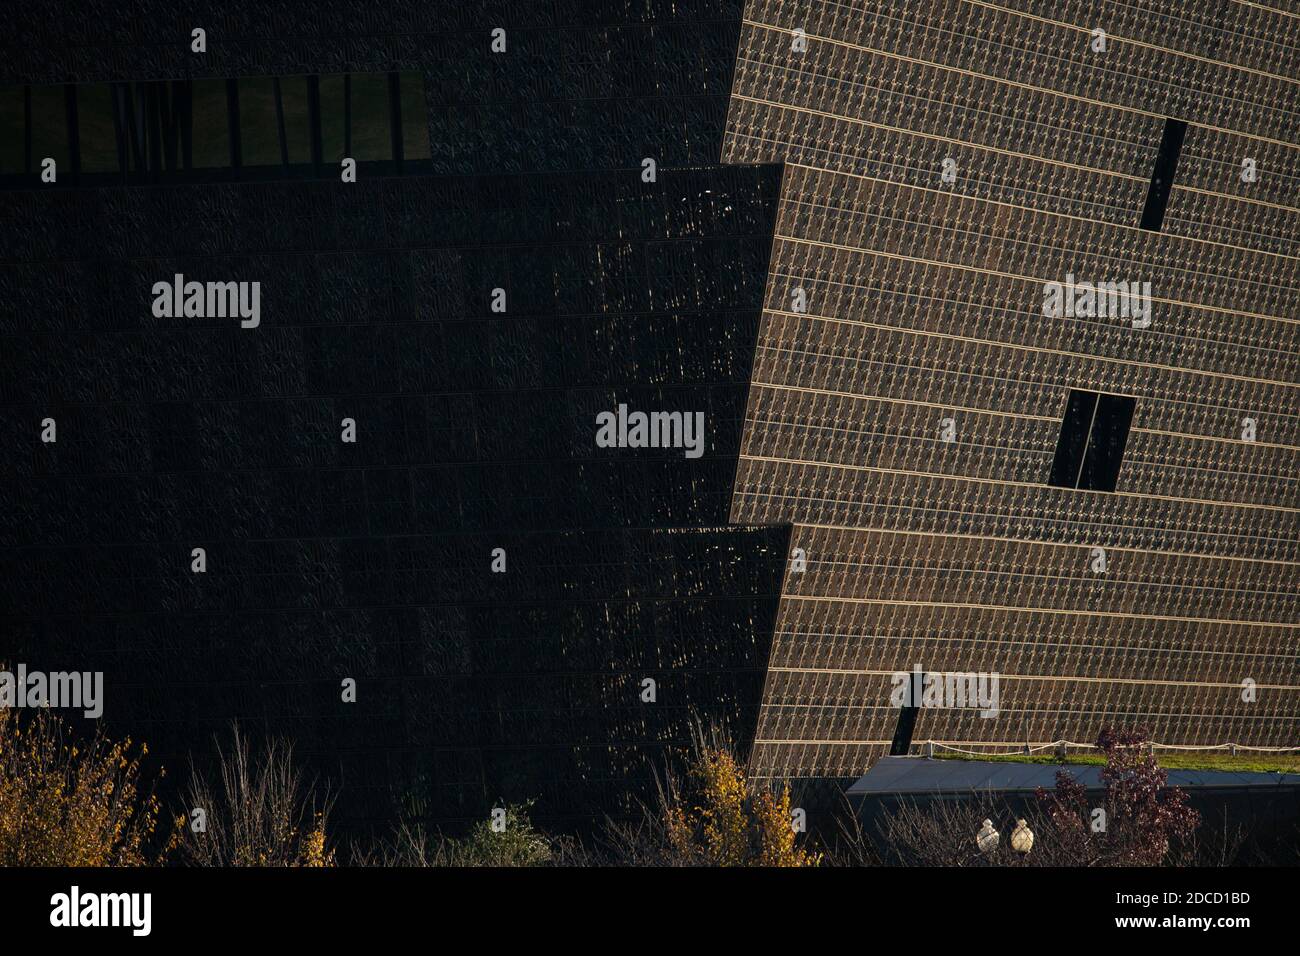 Washington, USA. 27th Jan, 2020. A detail view of the National Museum of African American History and Culture (NMAAHC), a Smithsonian Institution, in Washington, DC, on November 20, 2020, amid the coronavirus pandemic. As confirmed COVID-19 case counts soar across the country, Smithsonian Institutions in Washington announced they would be closing again starting next week. (Graeme Sloan/Sipa USA) Credit: Sipa USA/Alamy Live News Stock Photo